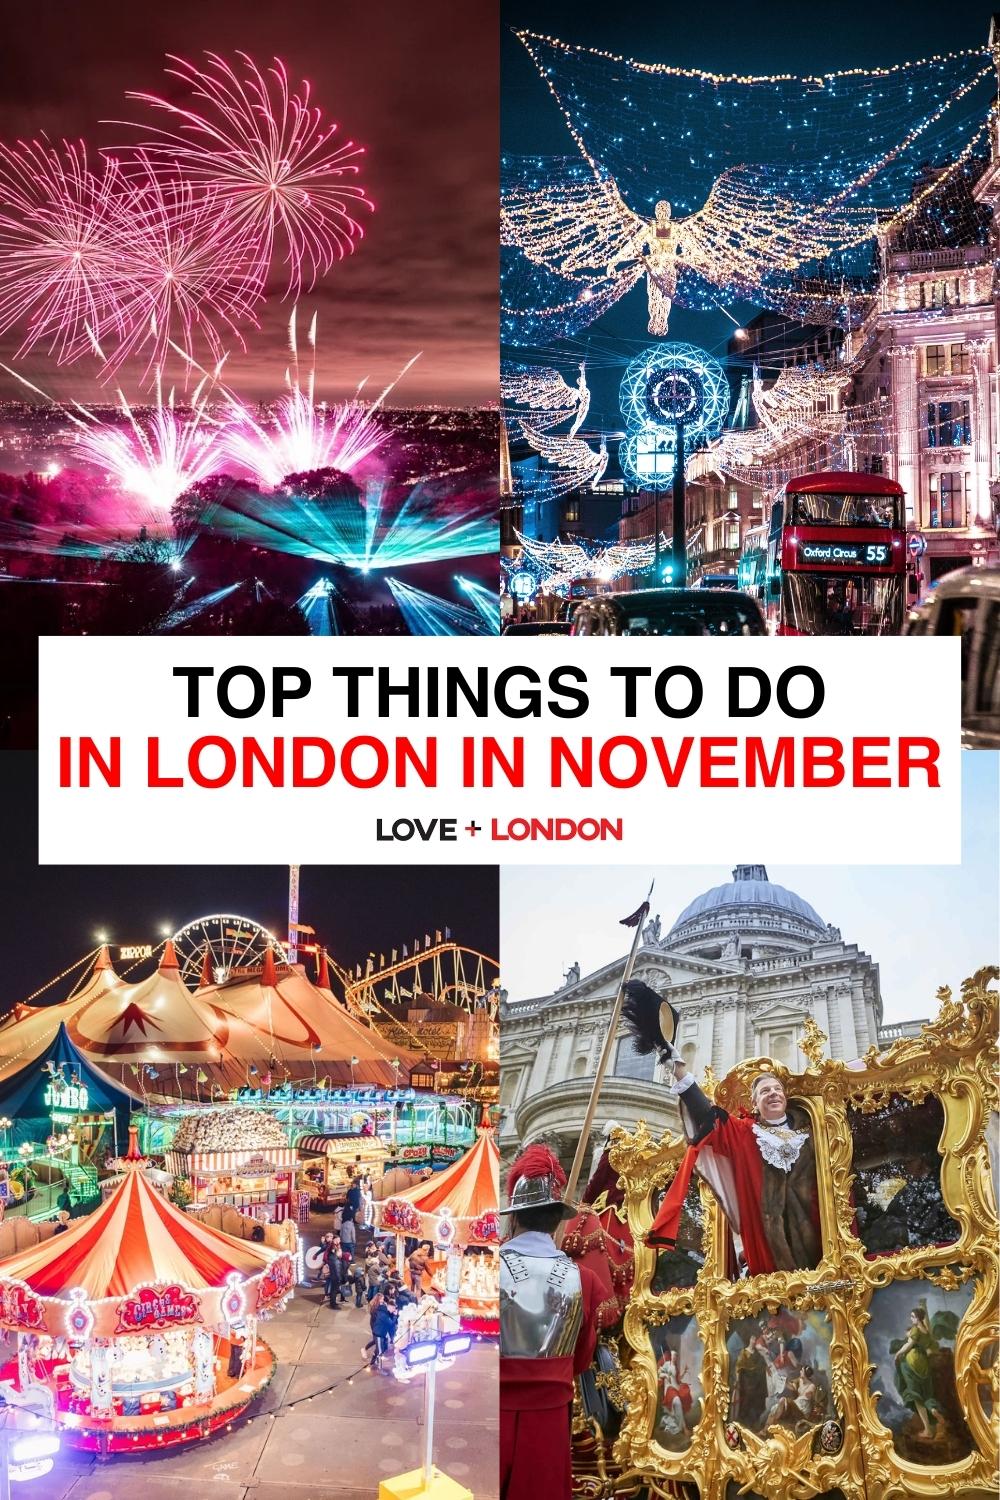 Top Things to Do in London in November